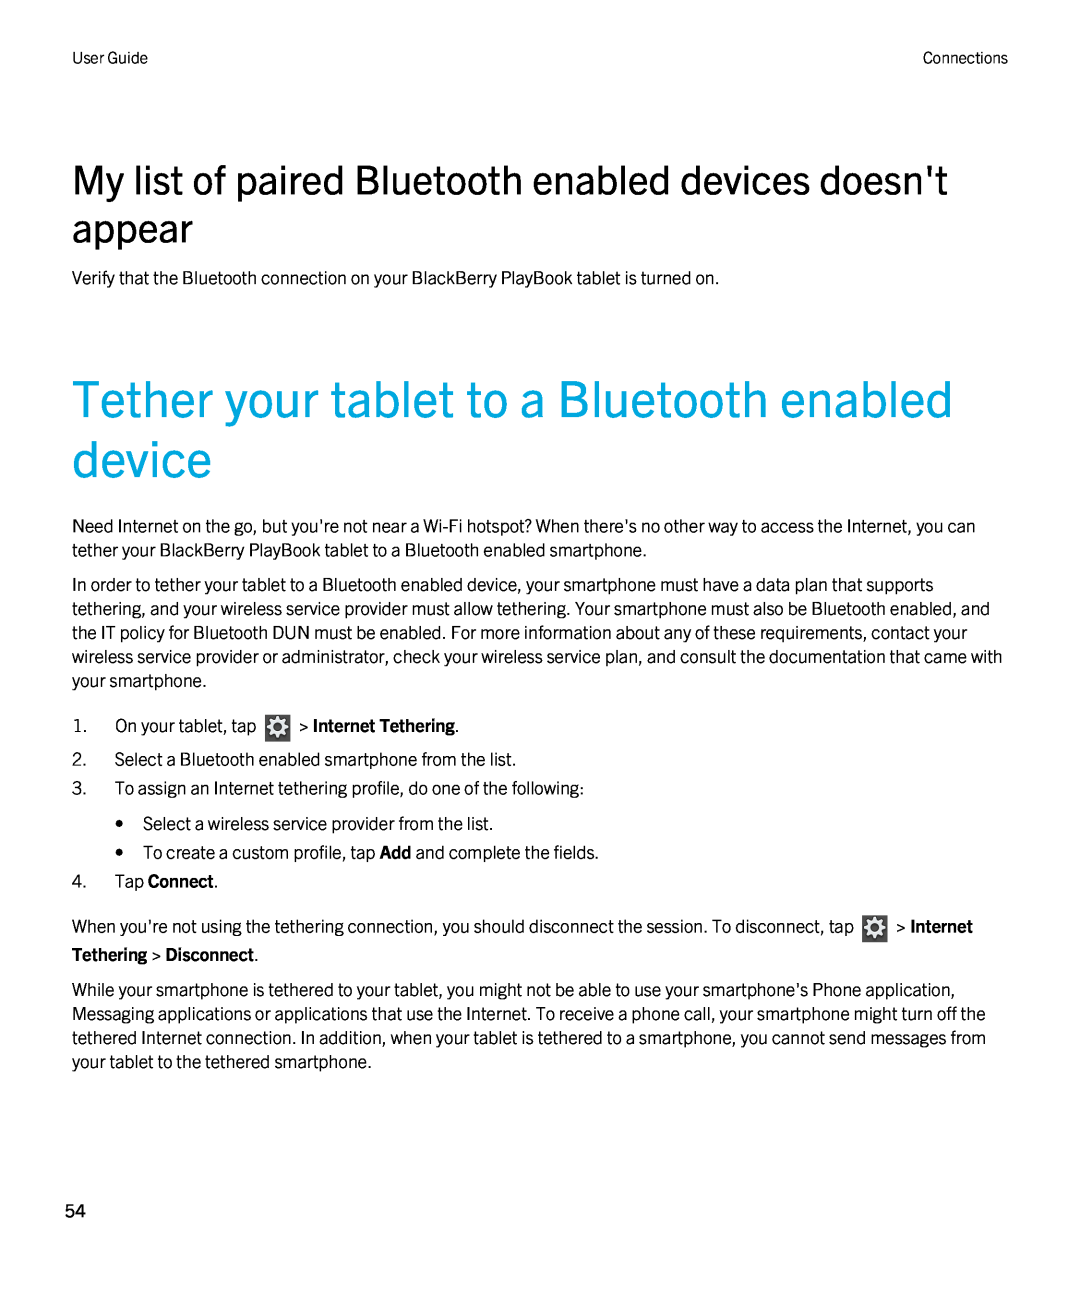 Blackberry 2.0.1 manual Tether your tablet to a Bluetooth enabled device, Tap Connect 